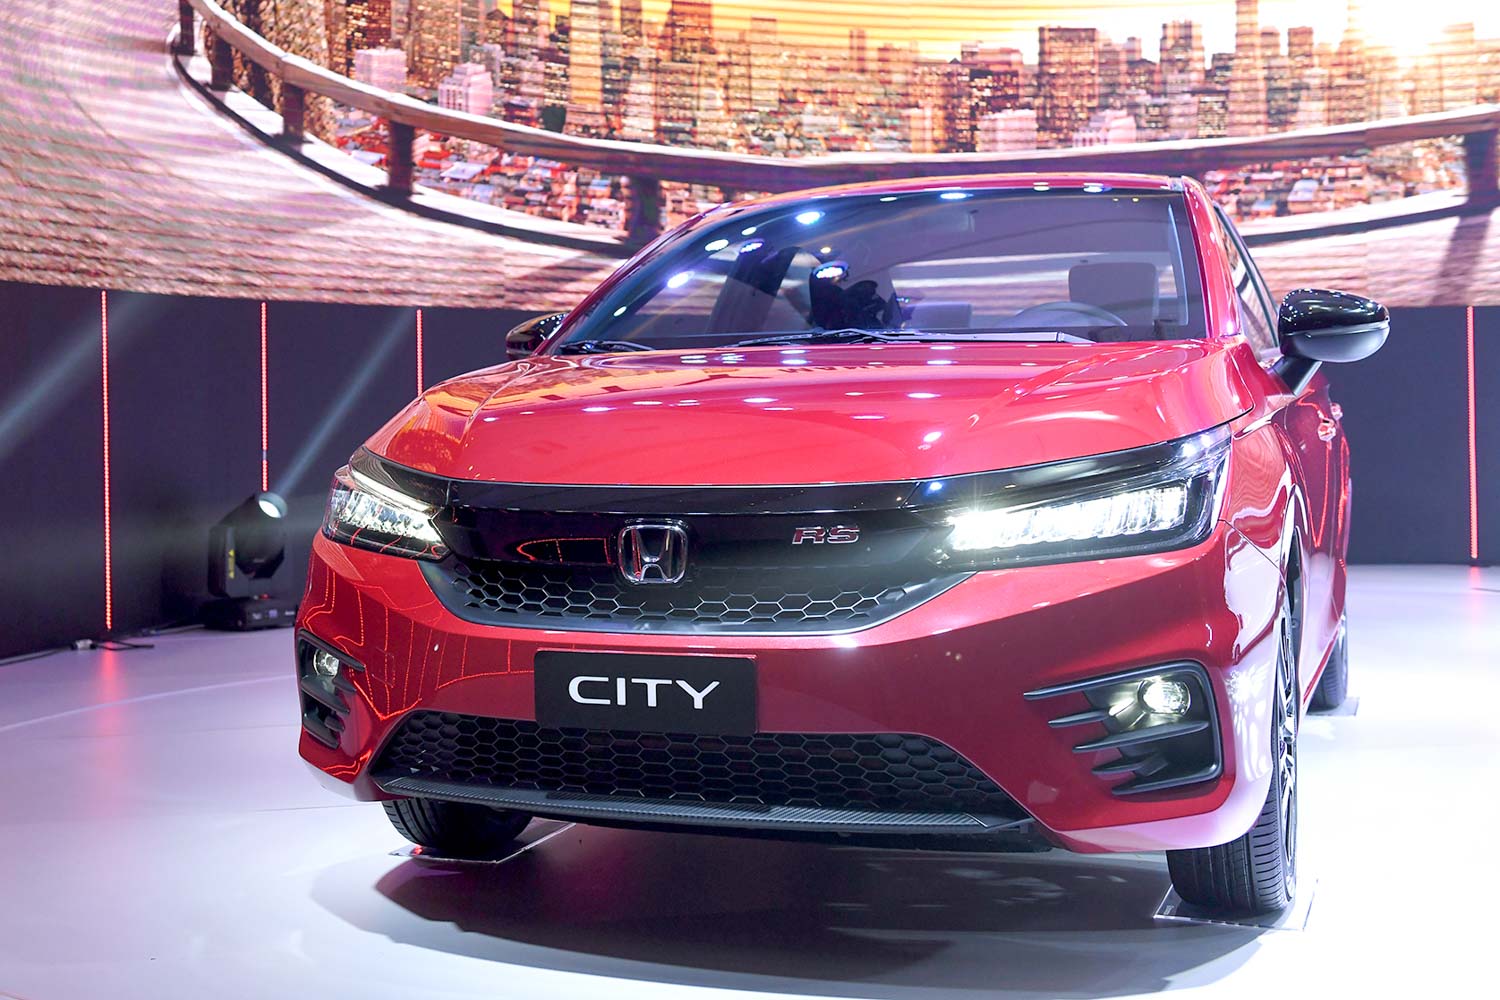 Honda City 2021 Rs - 2021 Honda City Hatchback Launched In Thailand A ...